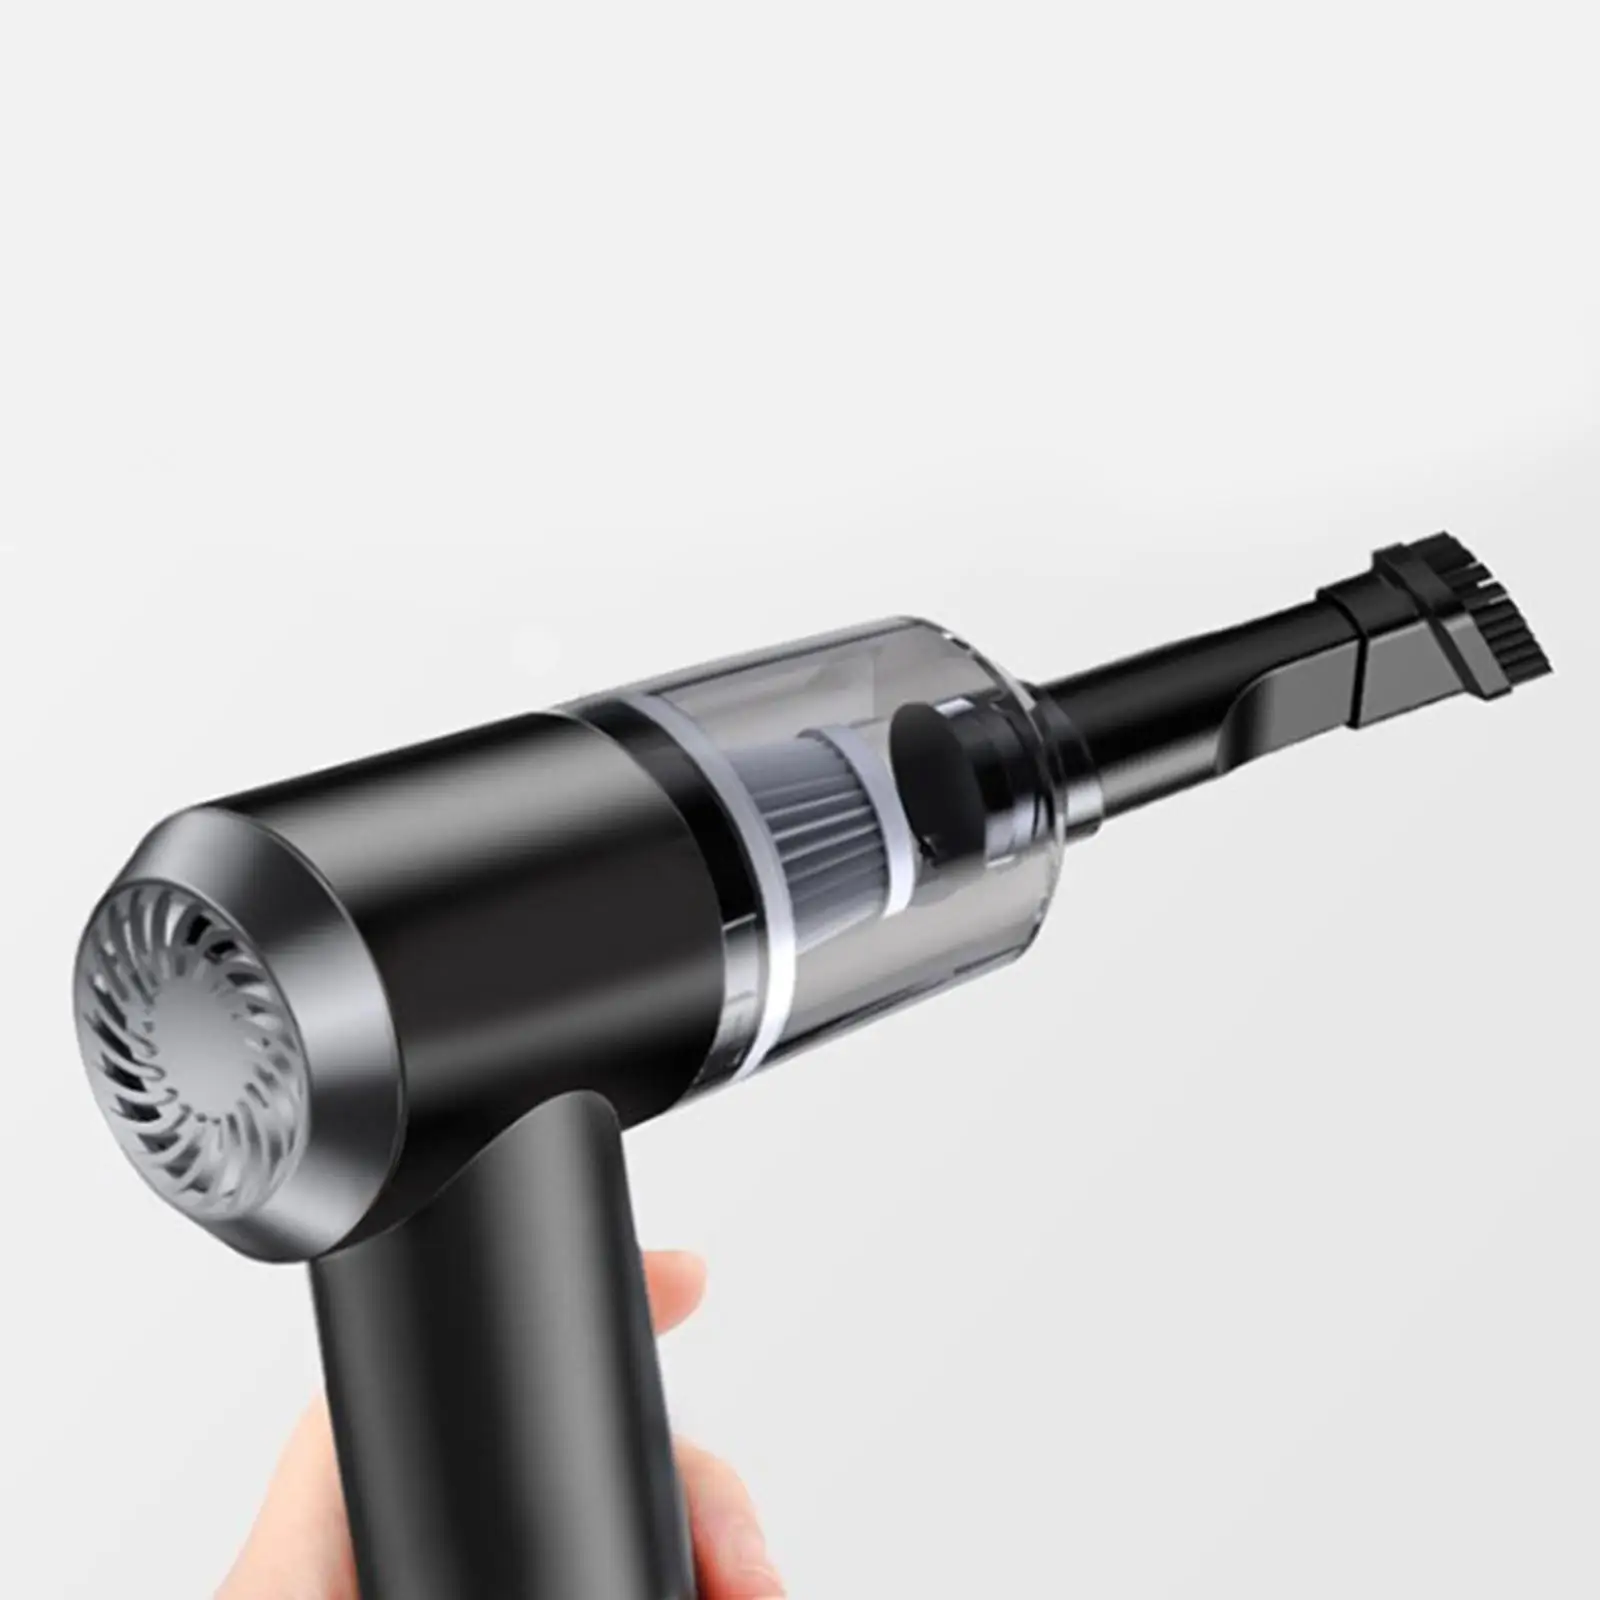 120W 5500pa Cordless Vacuum Cleaner Car Truck Duster Tool Wet & Dry Cleaning, with Washable HEPA Filter